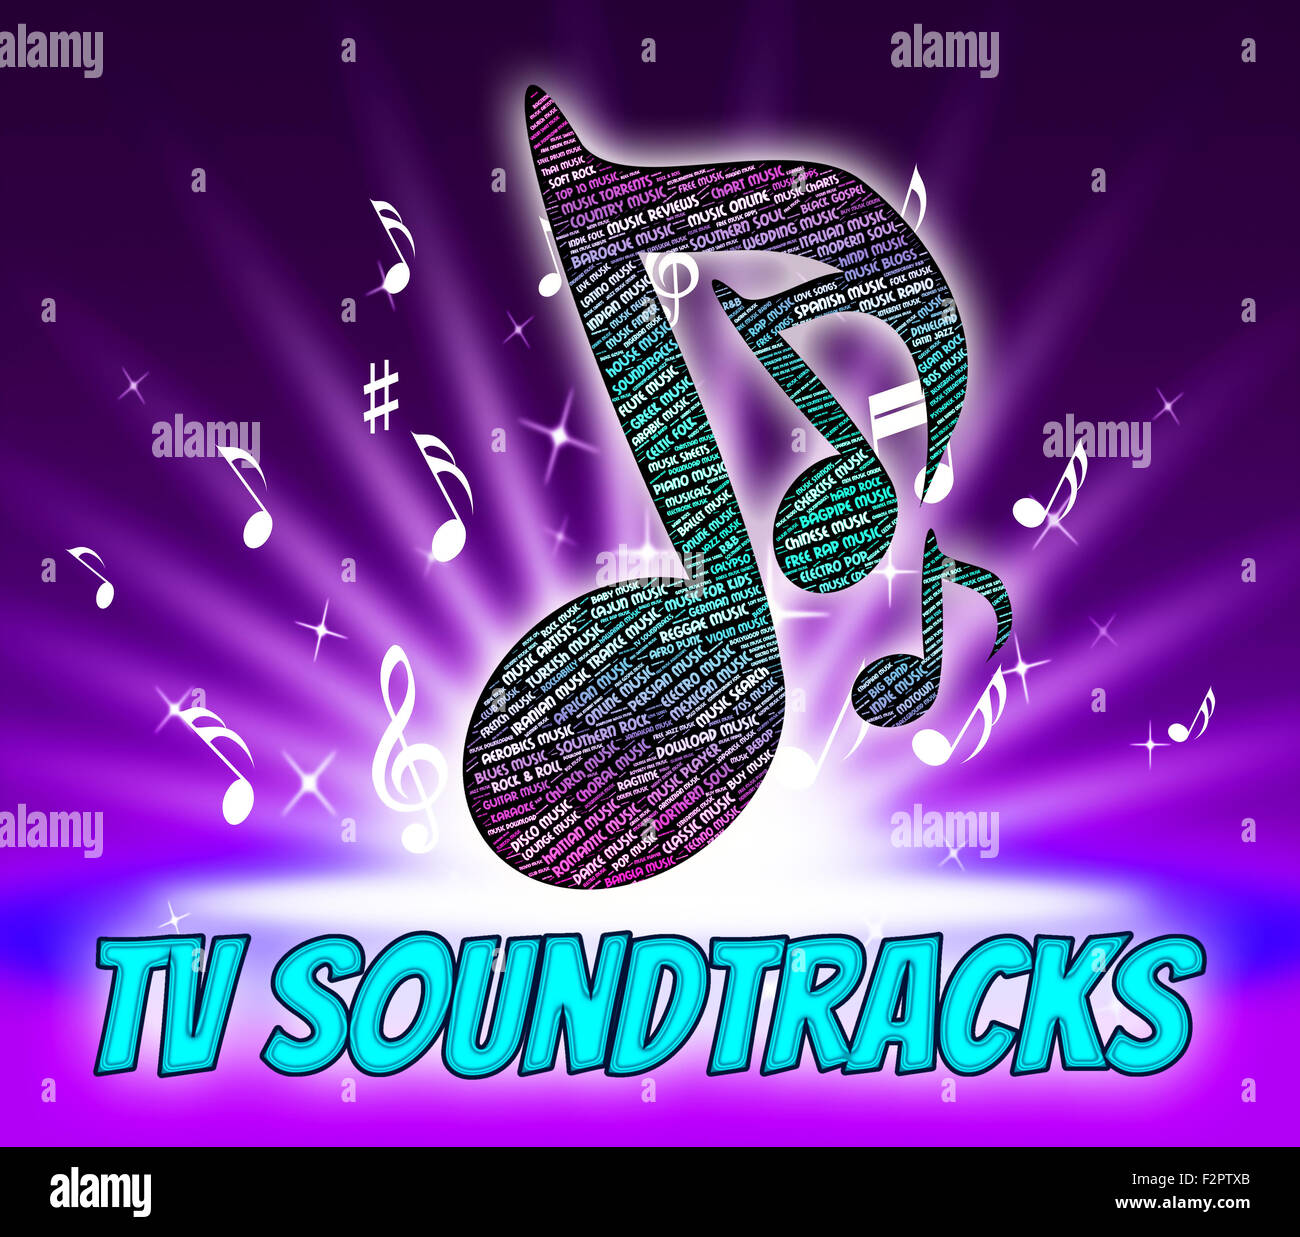 Tv Soundtracks Showing Recorded Music And Harmonies Stock Photo